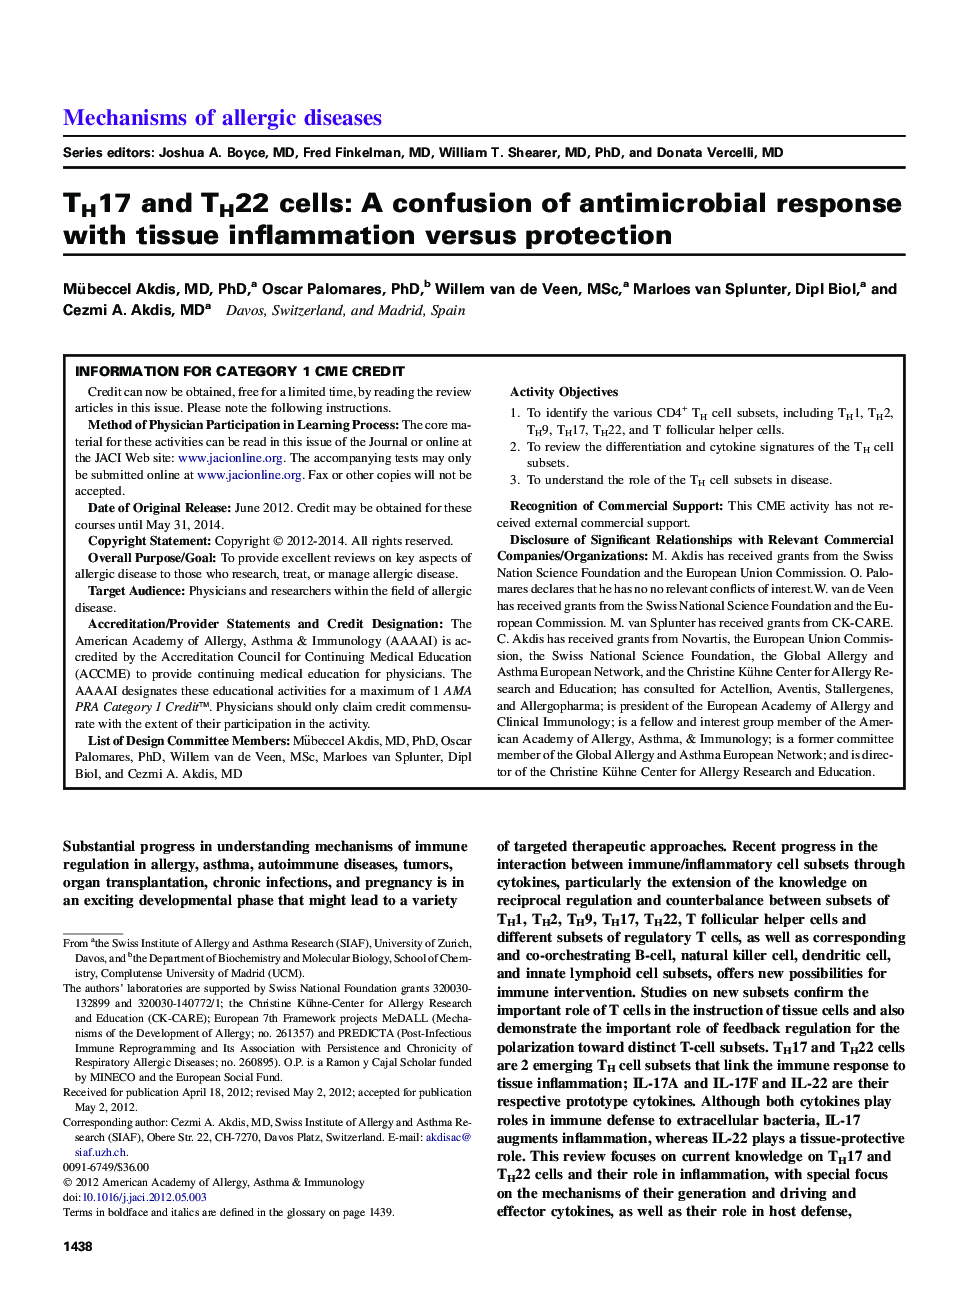 Reviews and feature articleTH17 and TH22 cells: AÂ confusion of antimicrobial response with tissue inflammation versus protection